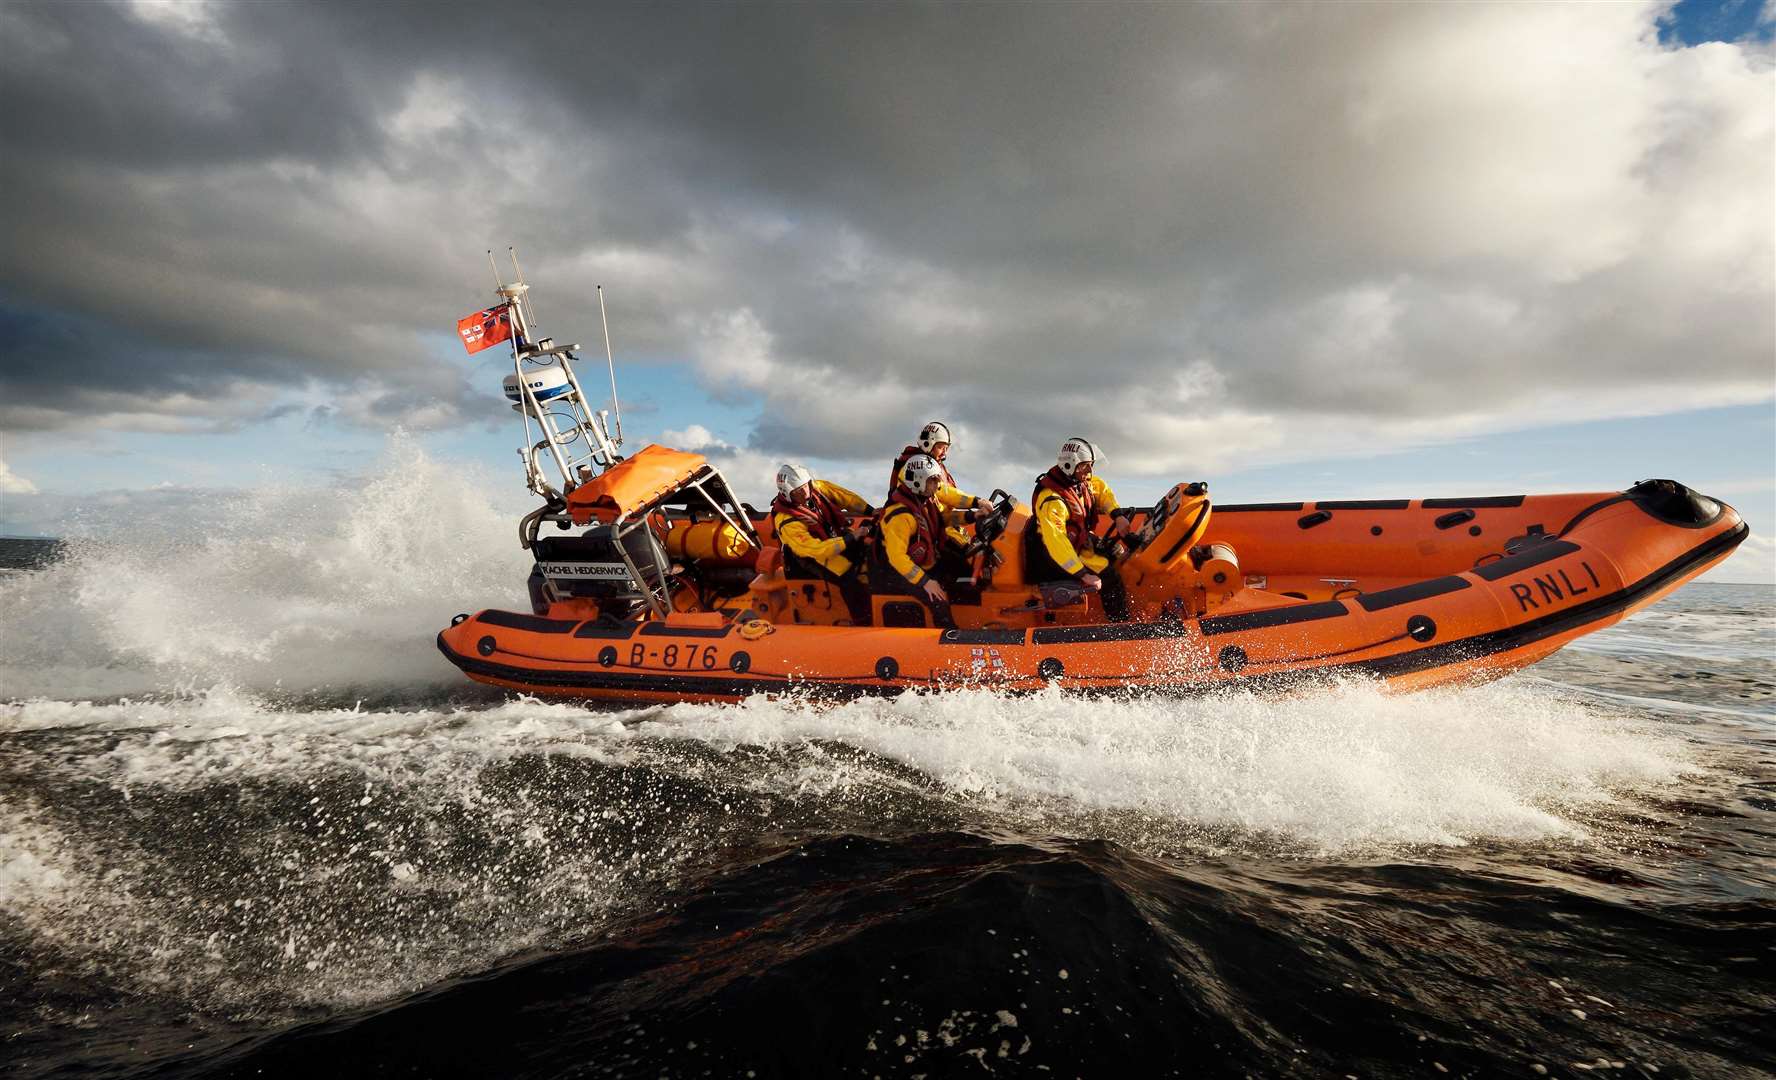 A new exhibition exploring the 200-year history of the RNLI is opening at the Historic Dockyard Chatham. Picture: RNLI